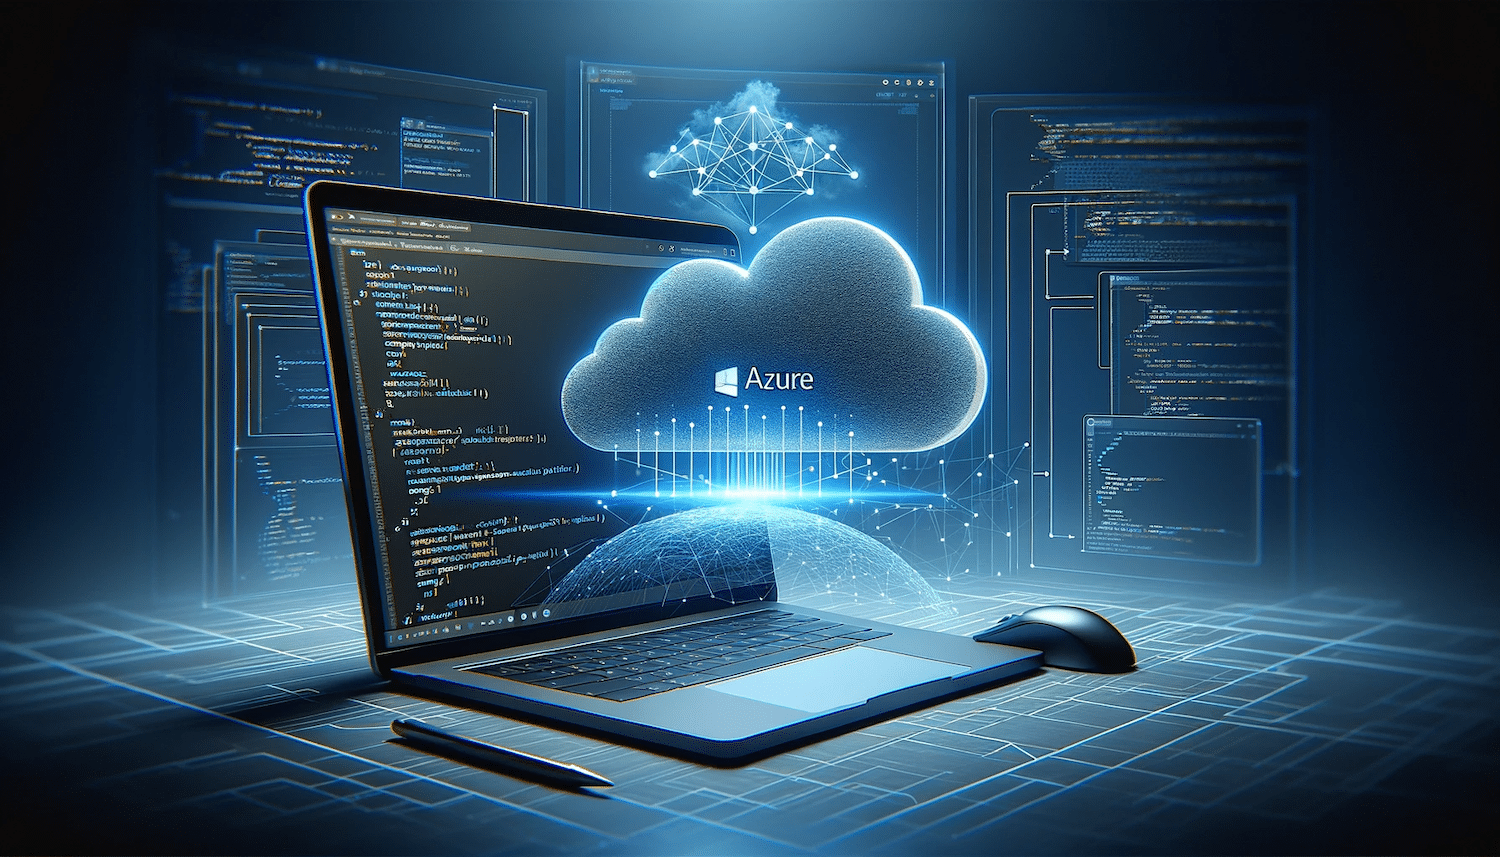 A modern laptop displaying web development code, with elements representing Azure cloud hosting, including the Azure logo and a cloud symbol. The image features a blue and grey color scheme, symbolizing the integration of SPA development and Azure cloud services.